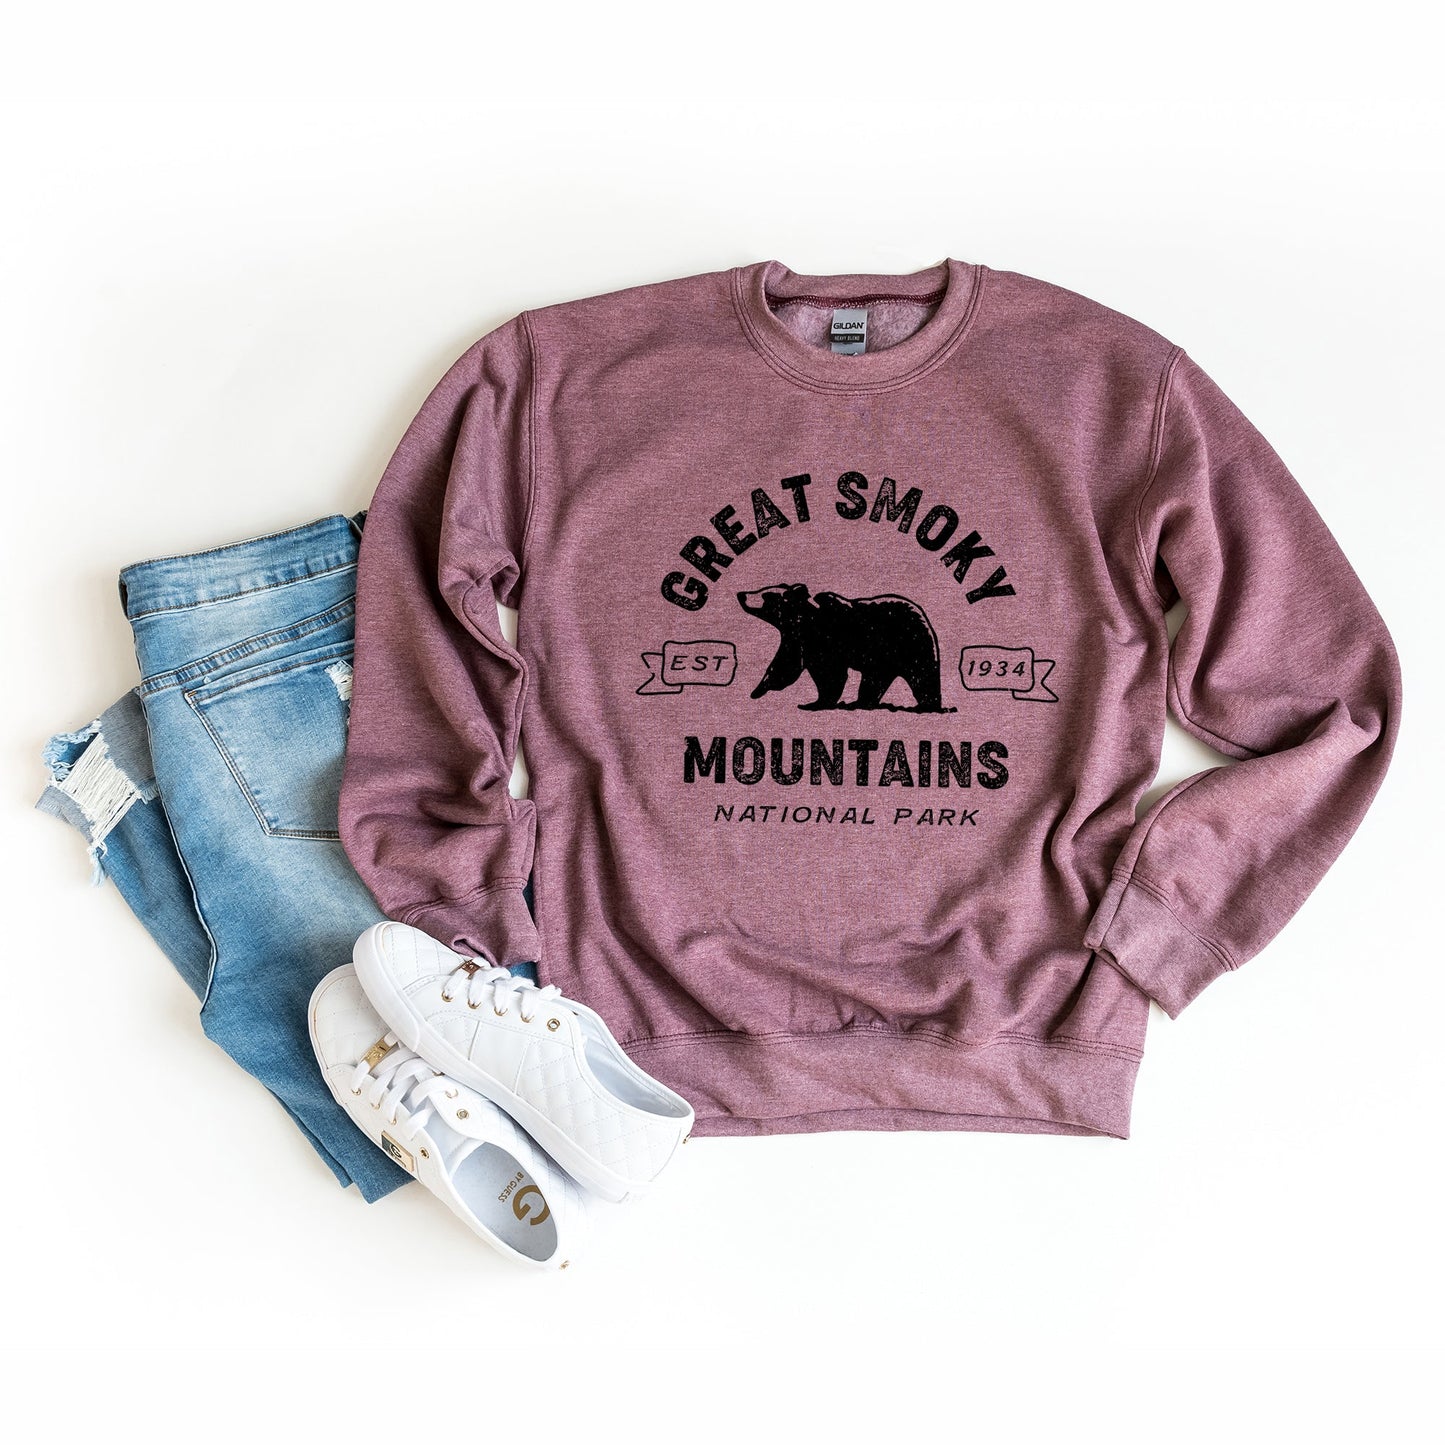 Clearance Vintage Great Smoky Mountains National Park | Sweatshirt